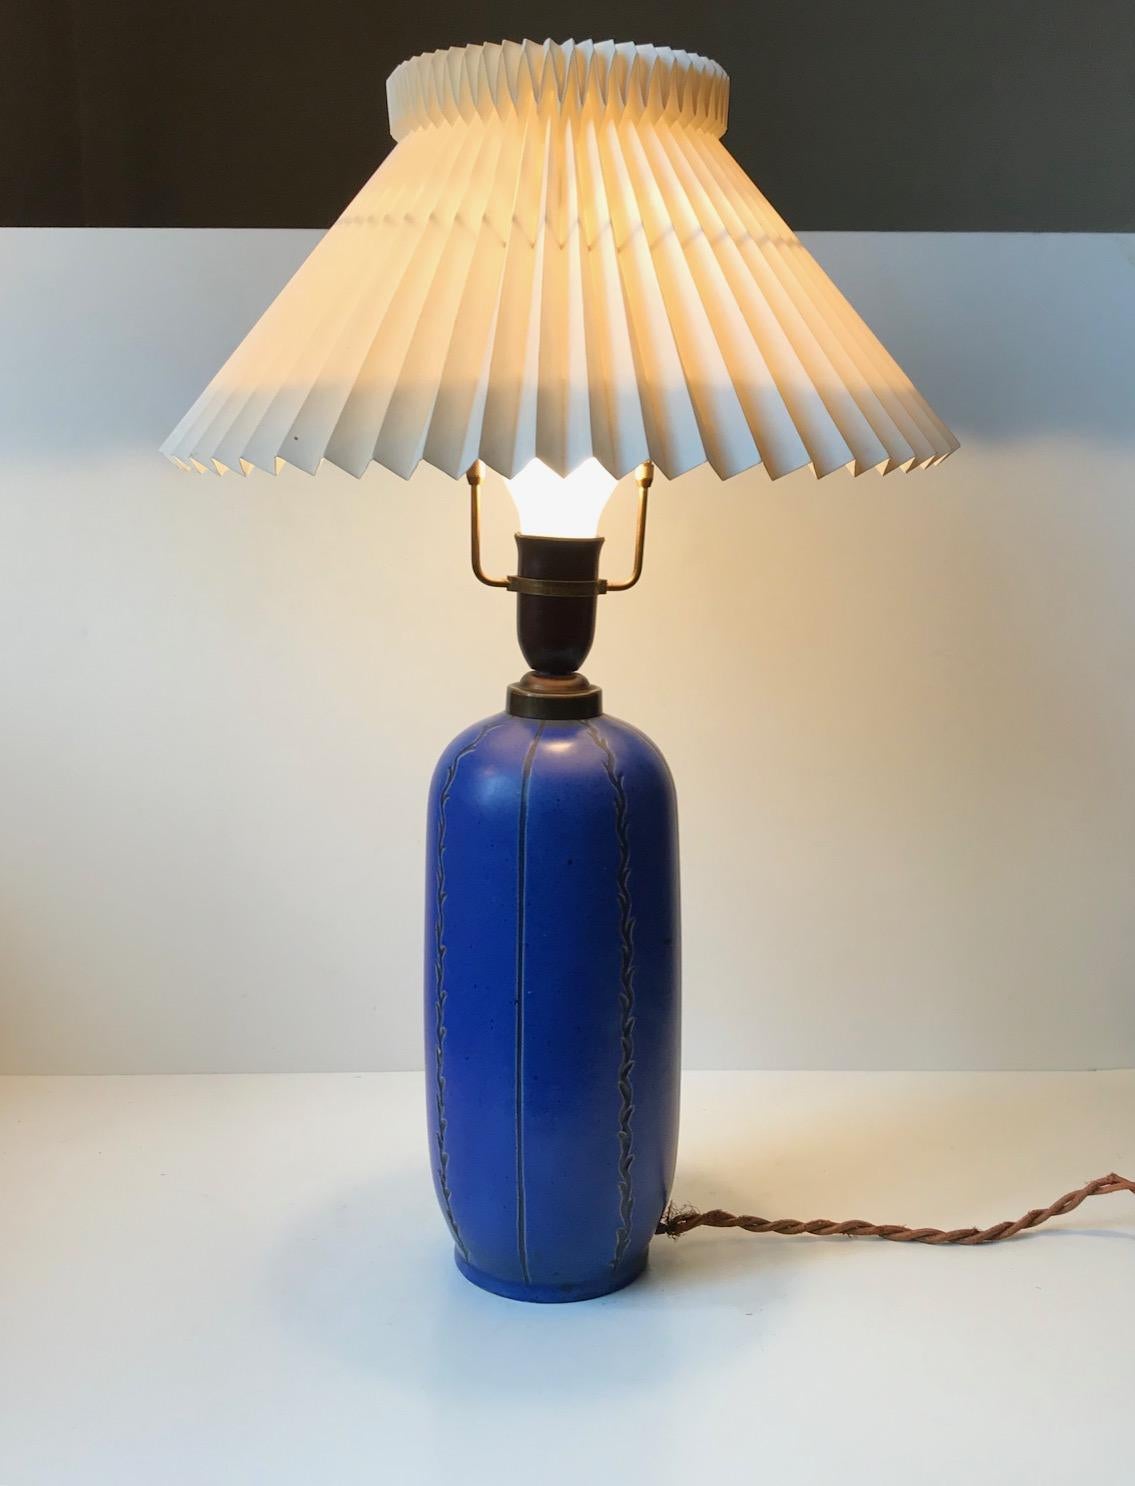 Perfectly shaped ceramic table lamp by Søholm, Denmark. It has a vibrant blue glaze and is decorated with stripes and stylised branches. This light comes without a shade so please personalize with your own pick.